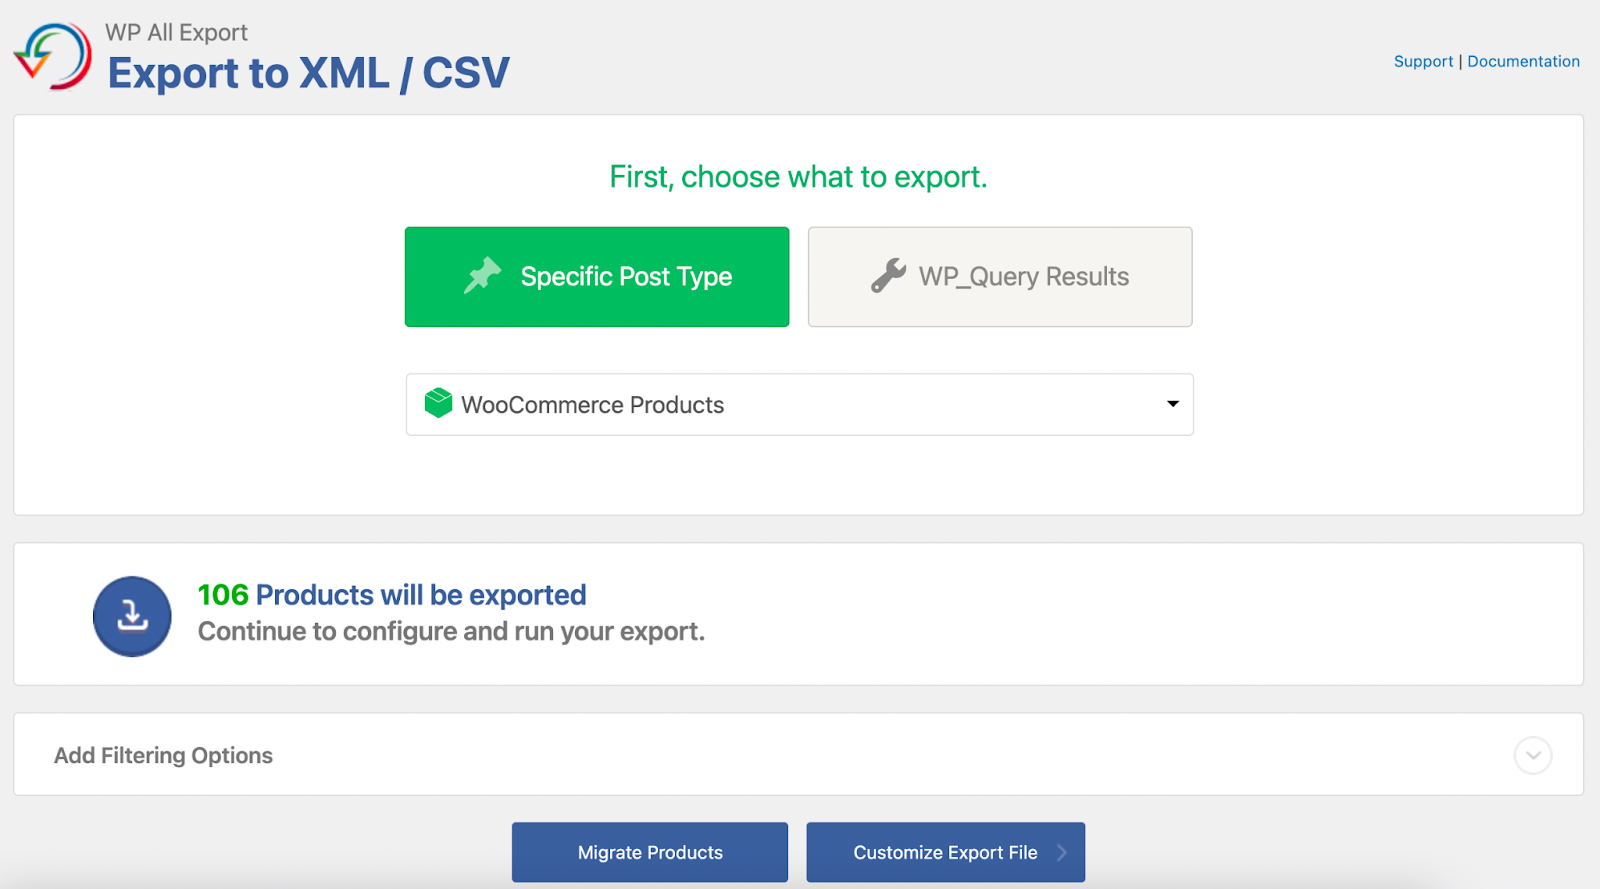 Go to All Export, New Export, and select “WooCommerce Products”